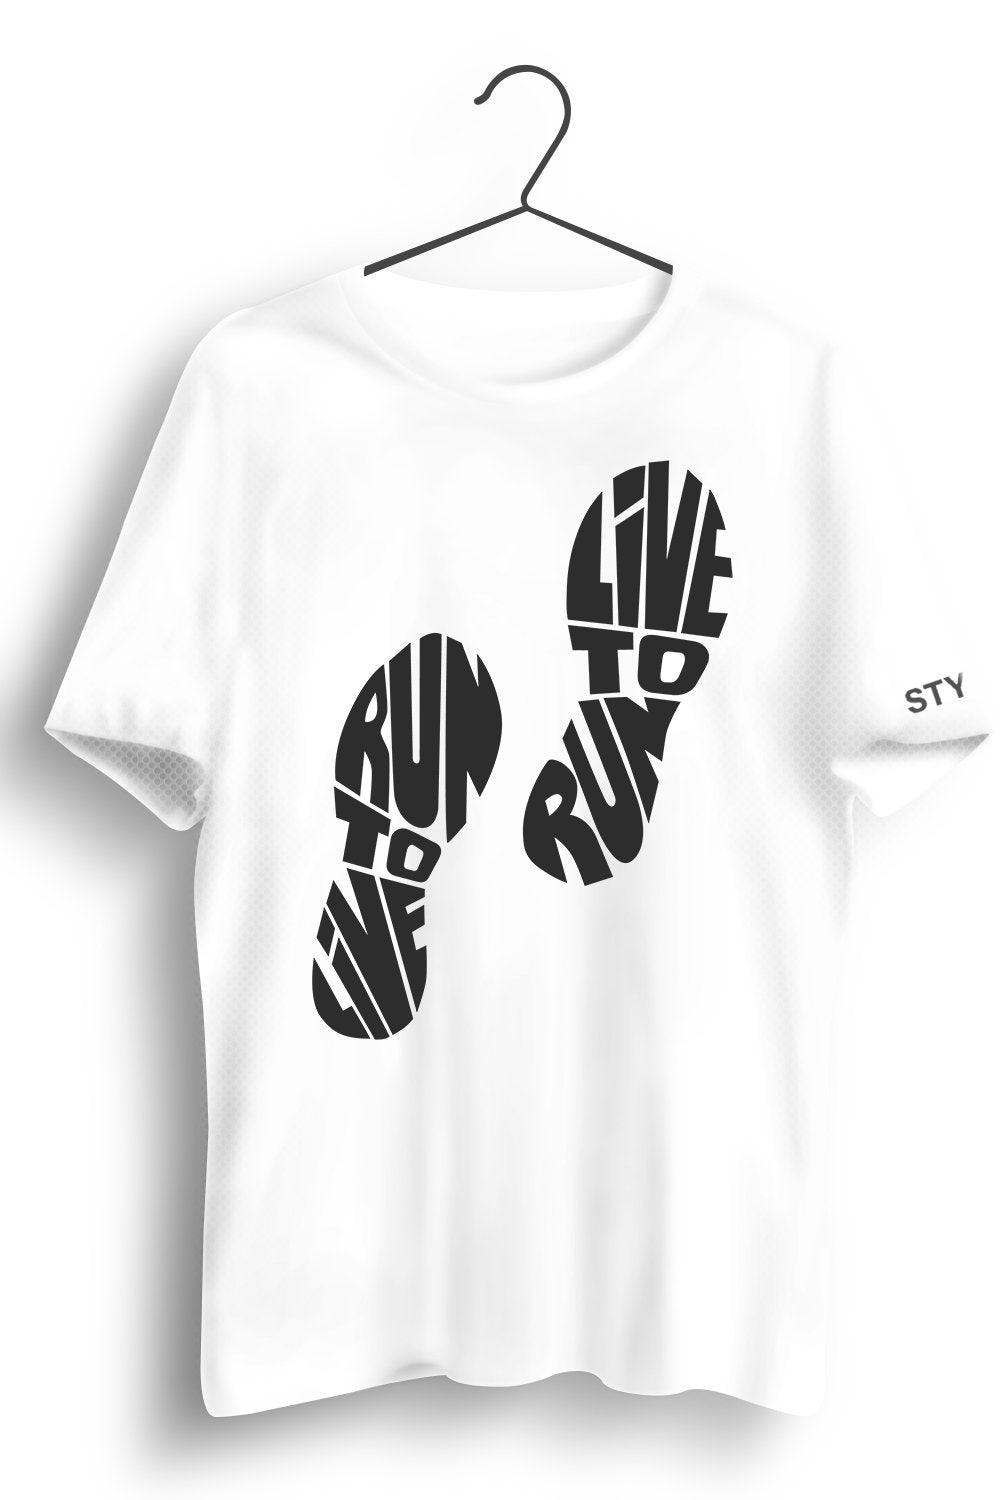 Run To Live Printed White Dry Fit Tee